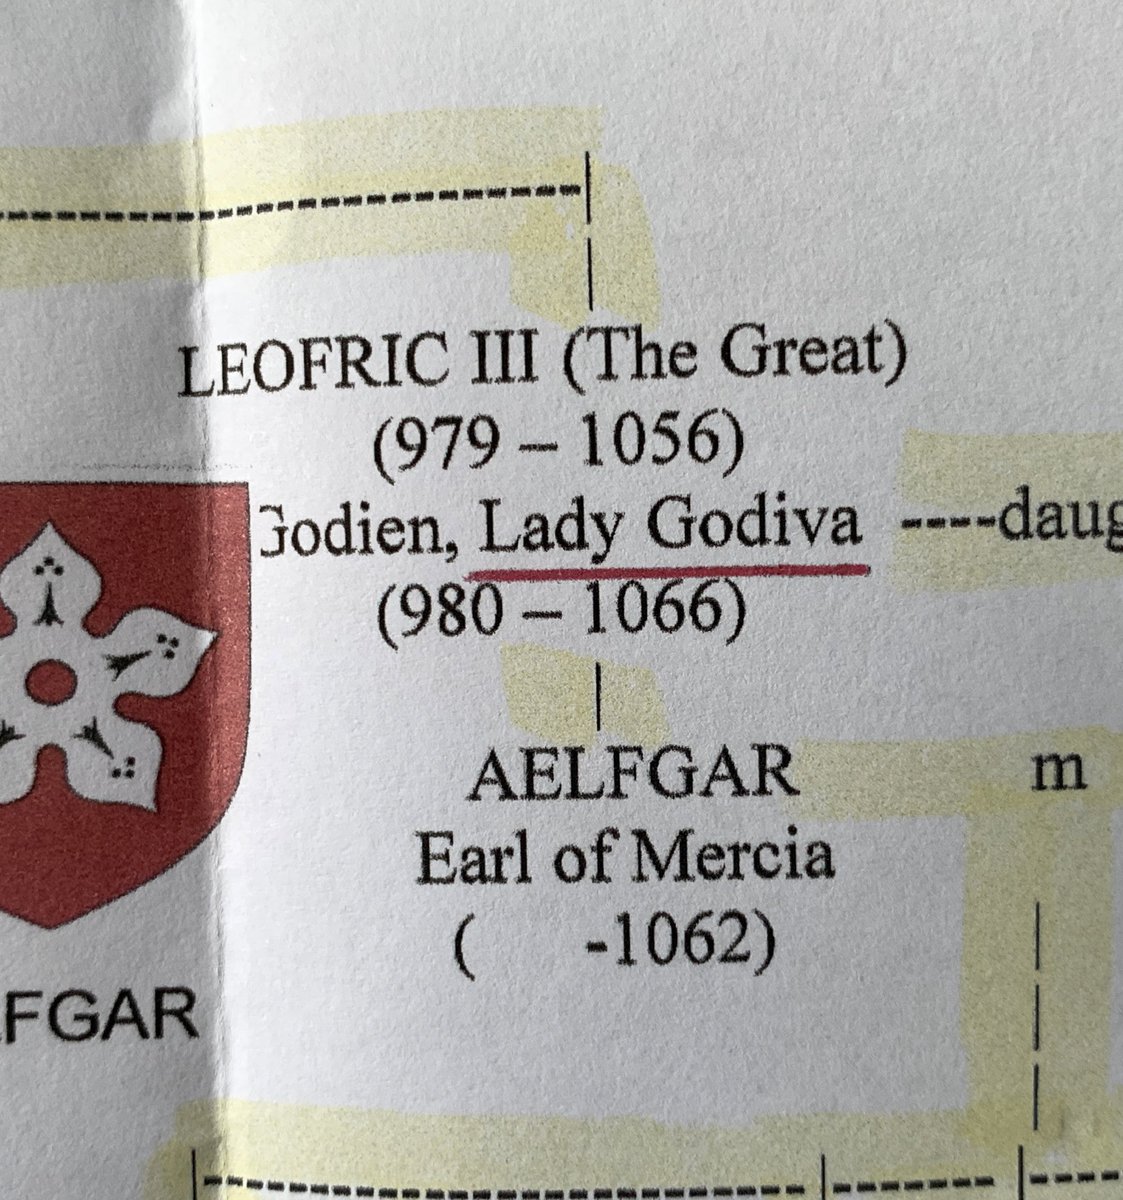 First up, this one we’ve known about for a bit, but my wife’s grandma was related to the wife of Leofric, Earl of Mercia. That’s Lady Godiva, folks.